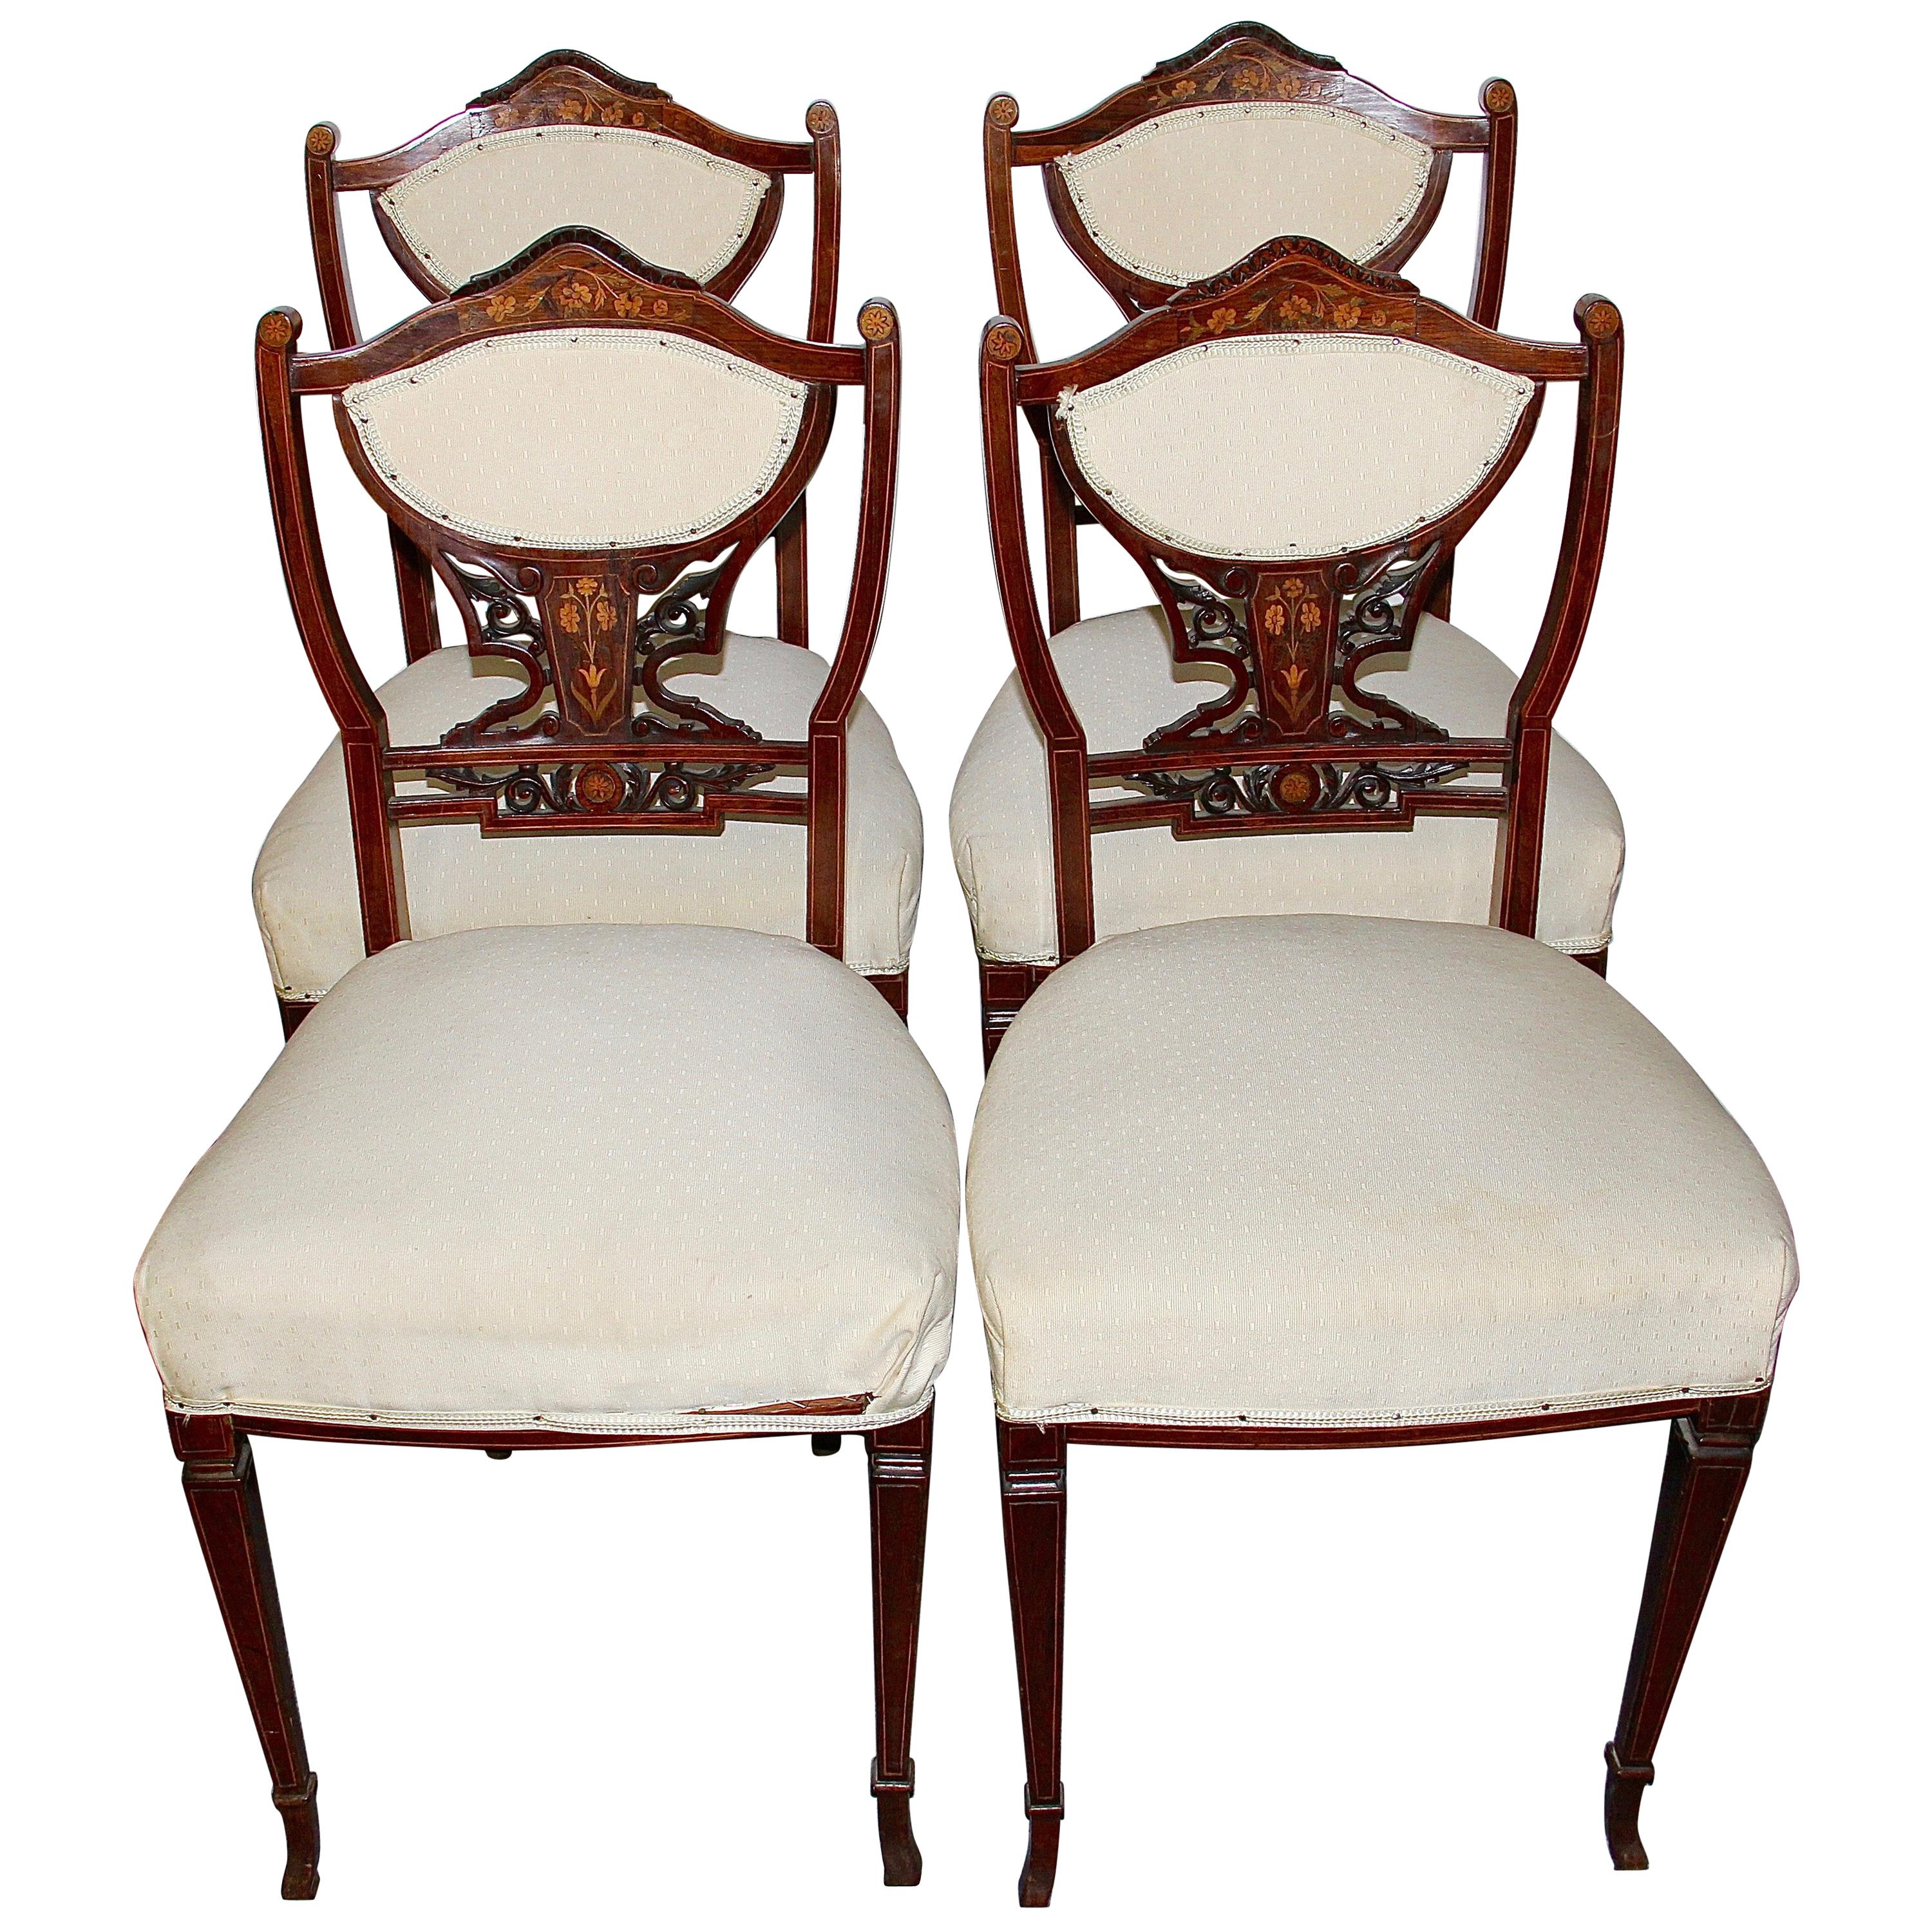 Set of Four Antique Inlaid Side Chairs, 19th Century